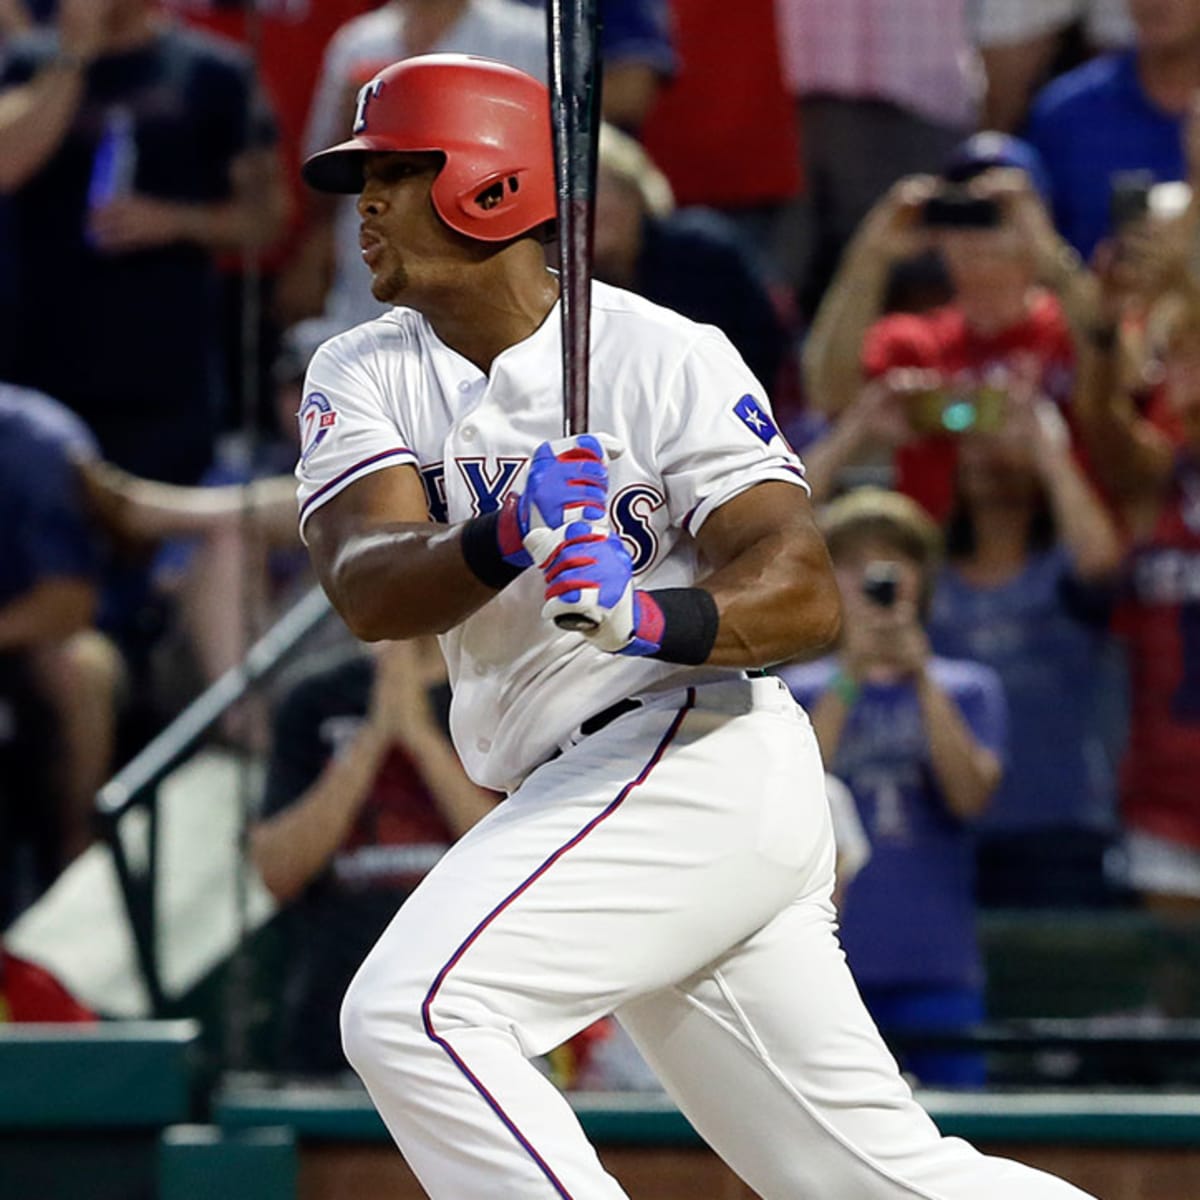 Beltre doubles for 3,000th hit, 1st from Dominican to do it